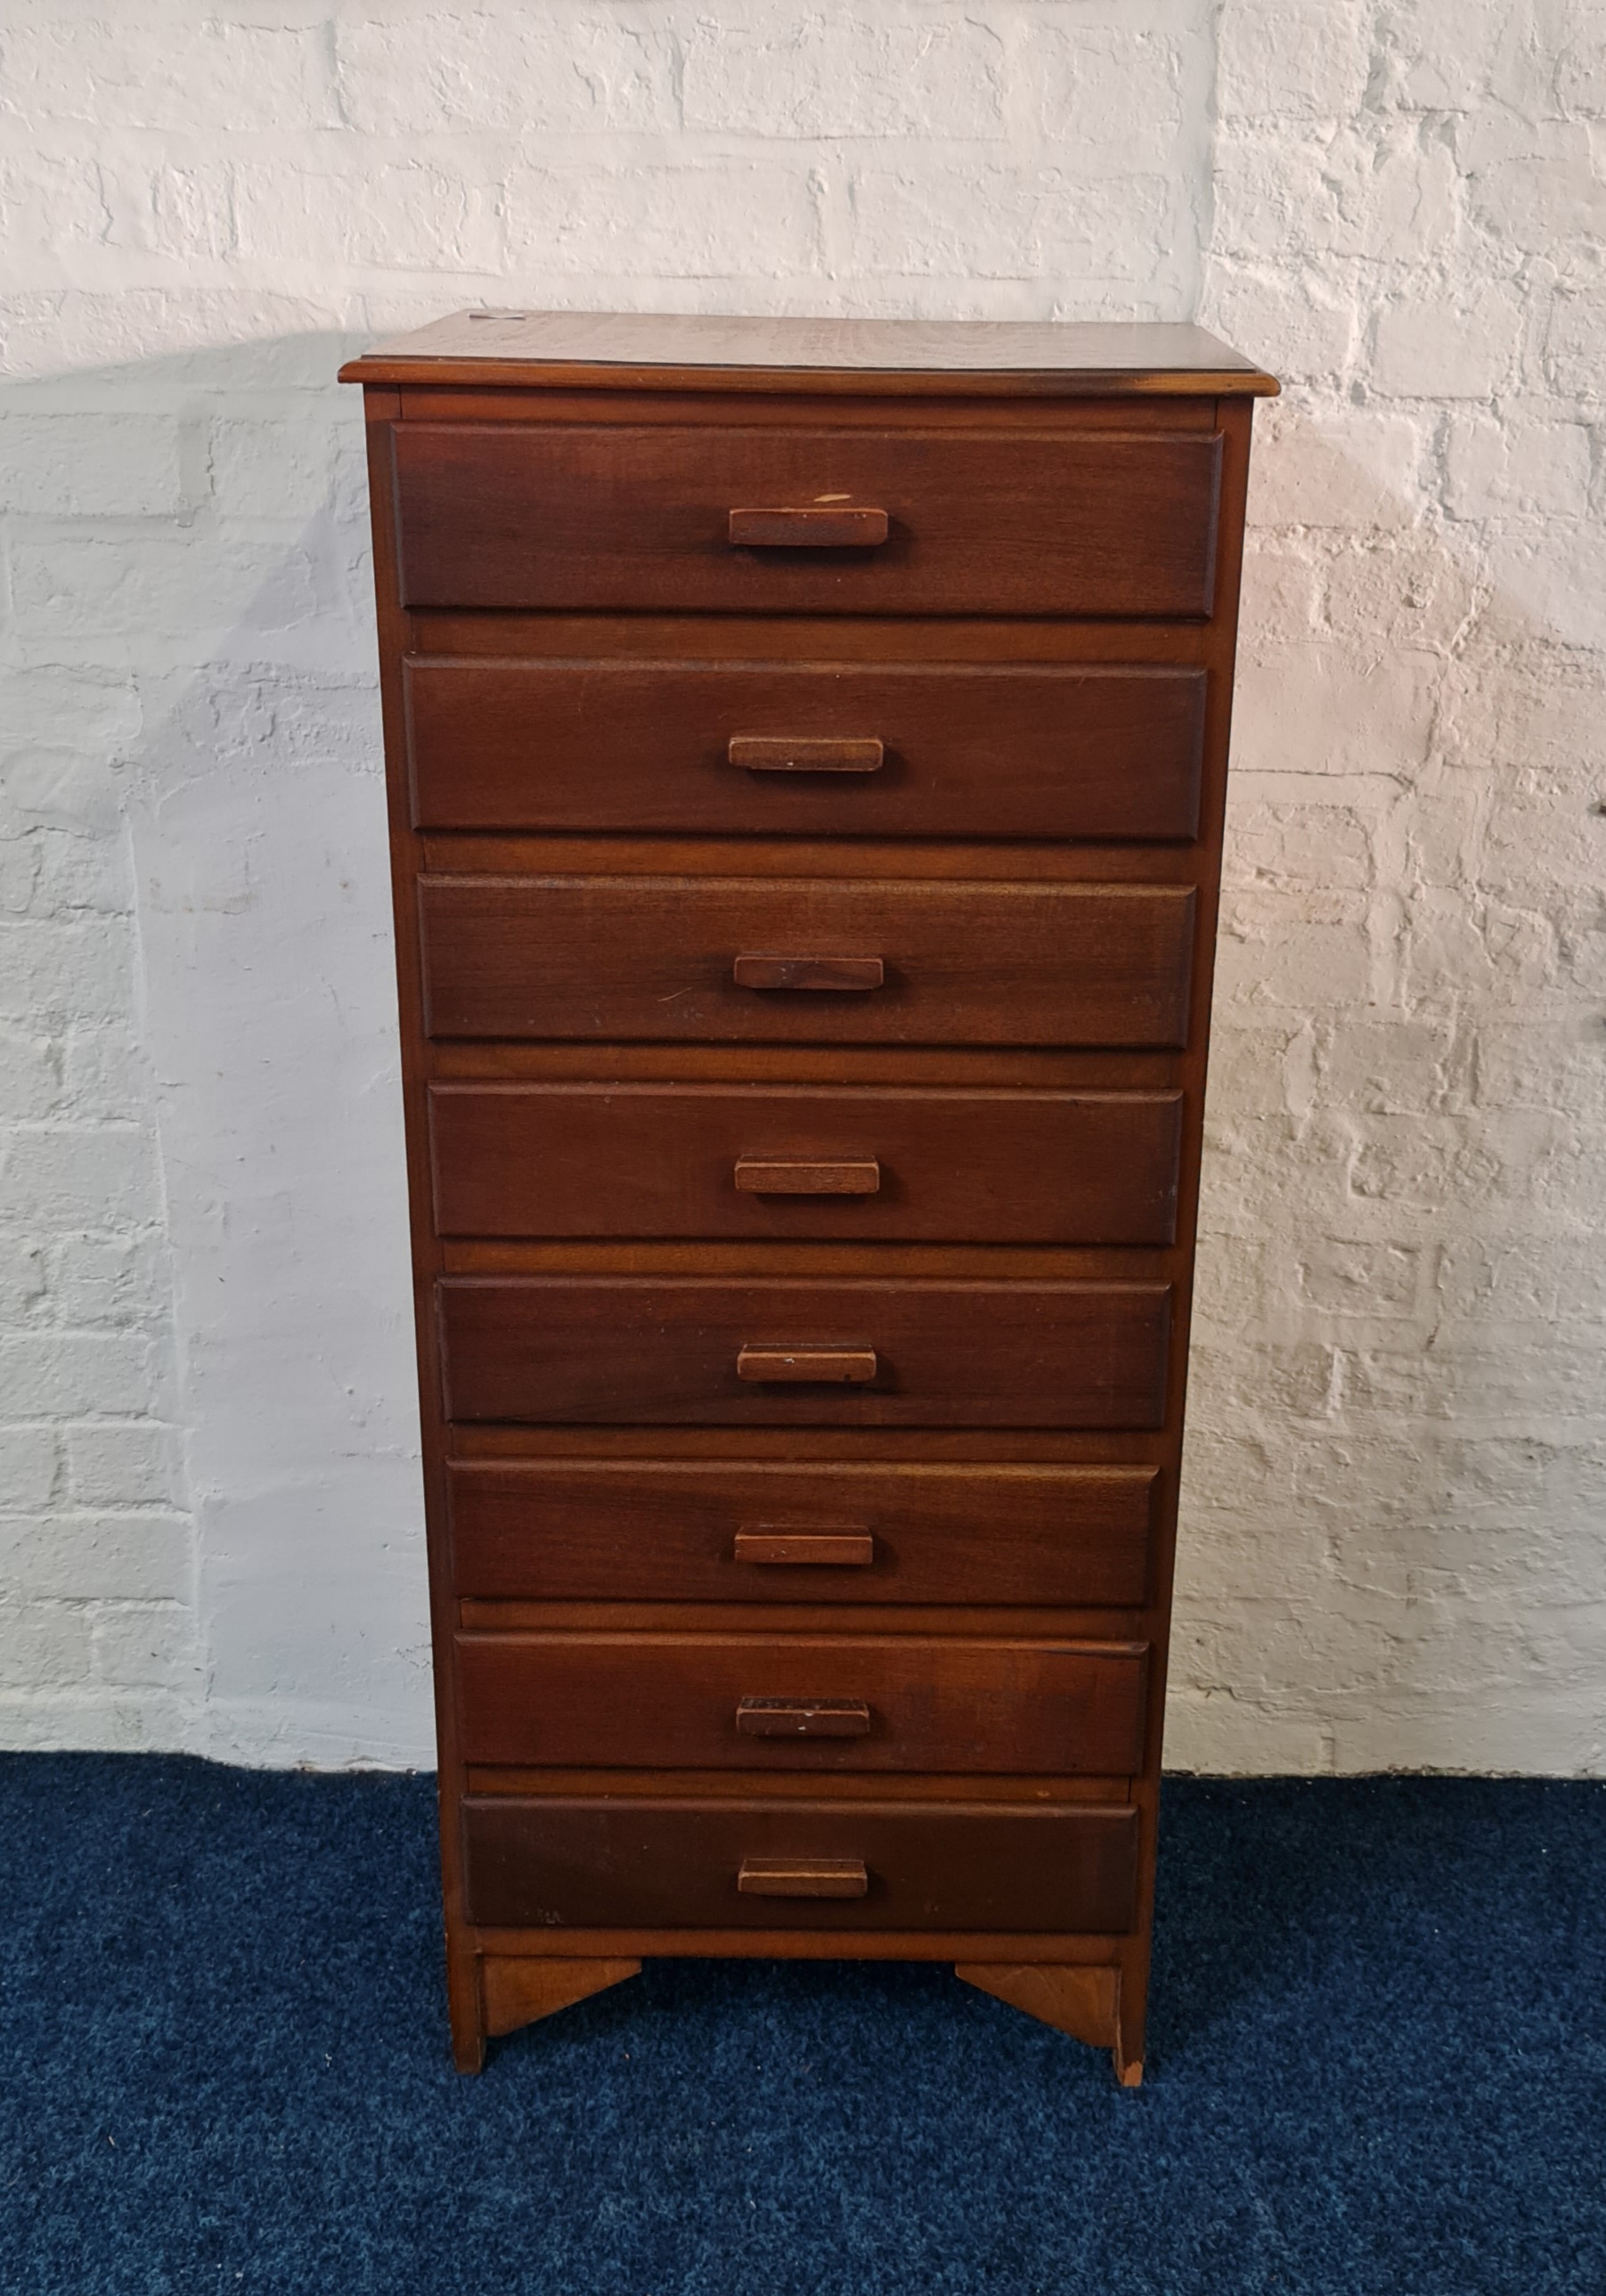 A narrow eight draw chest IMPORTANT: Online viewing and bidding only. Collection by appointment